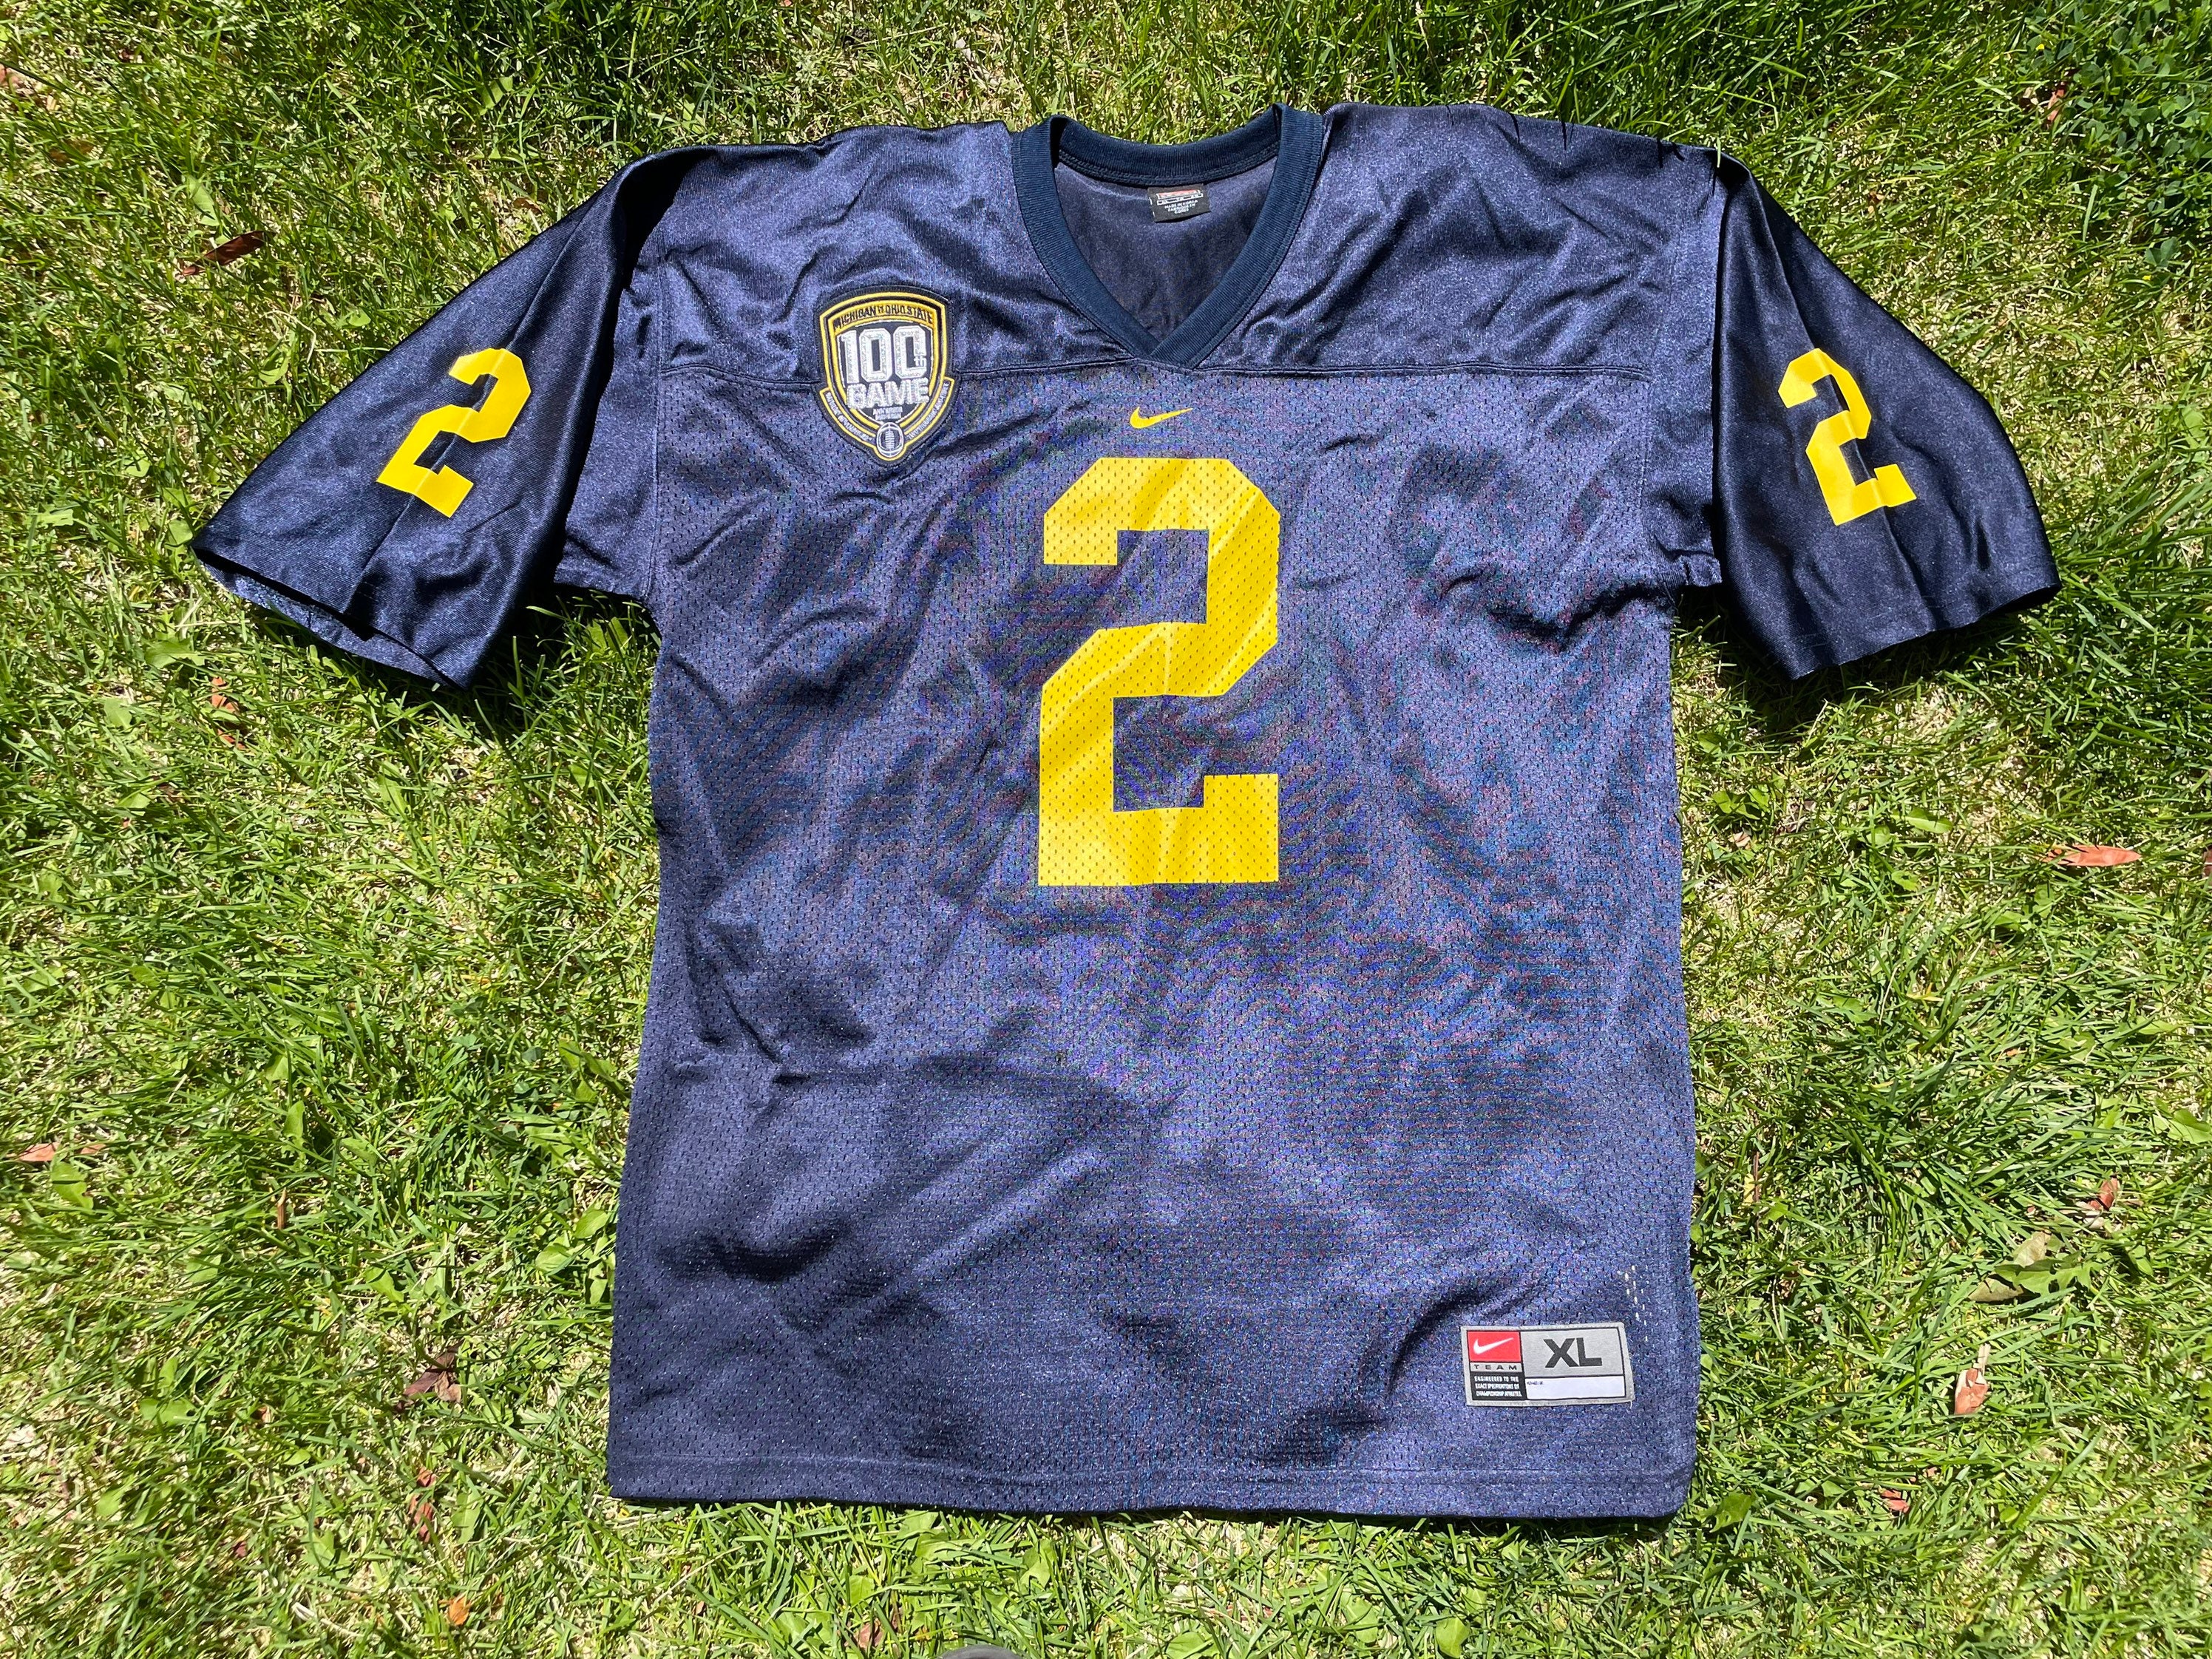 Michigan Wolverines Charles Woodson #2 Football College-NCAA Nike Jersey  SizeM